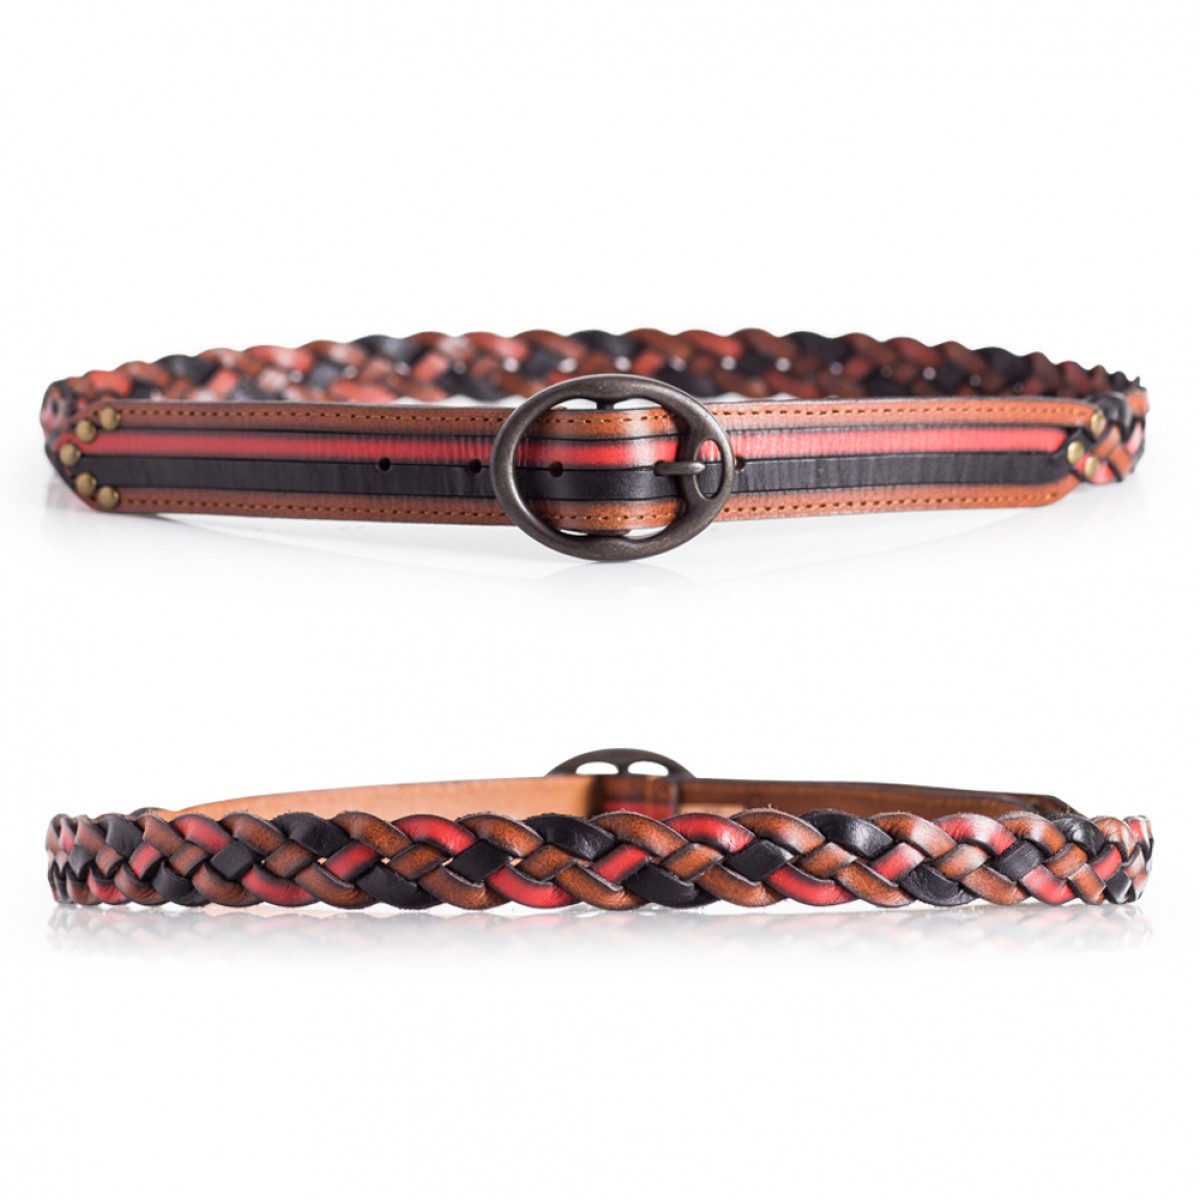 Ladies Braided Leather Belt Black Red Brown Width 1.1&#39;&#39; Fits Waist Sizes 28in - 35in | LATICCI